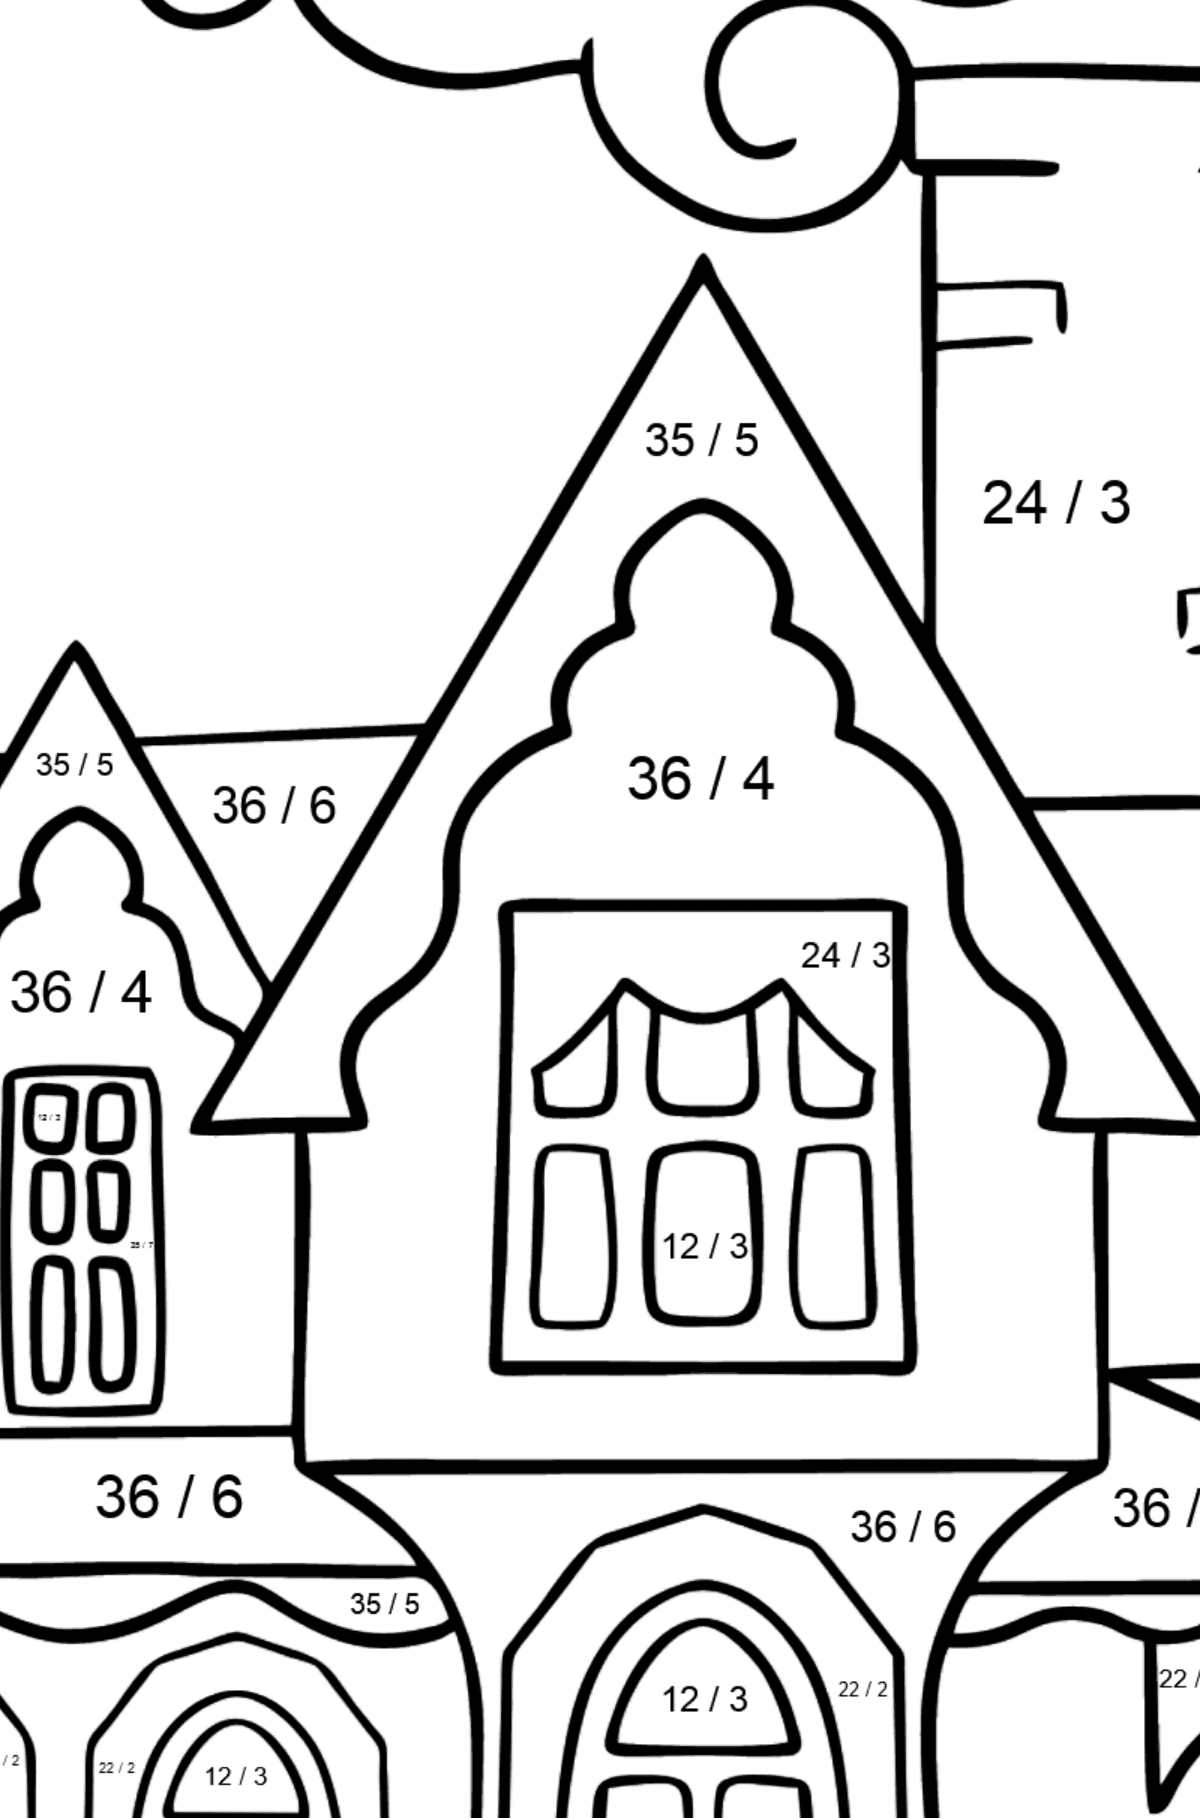 Coloring Page - A Miraculous House - Math Coloring - Division for Kids